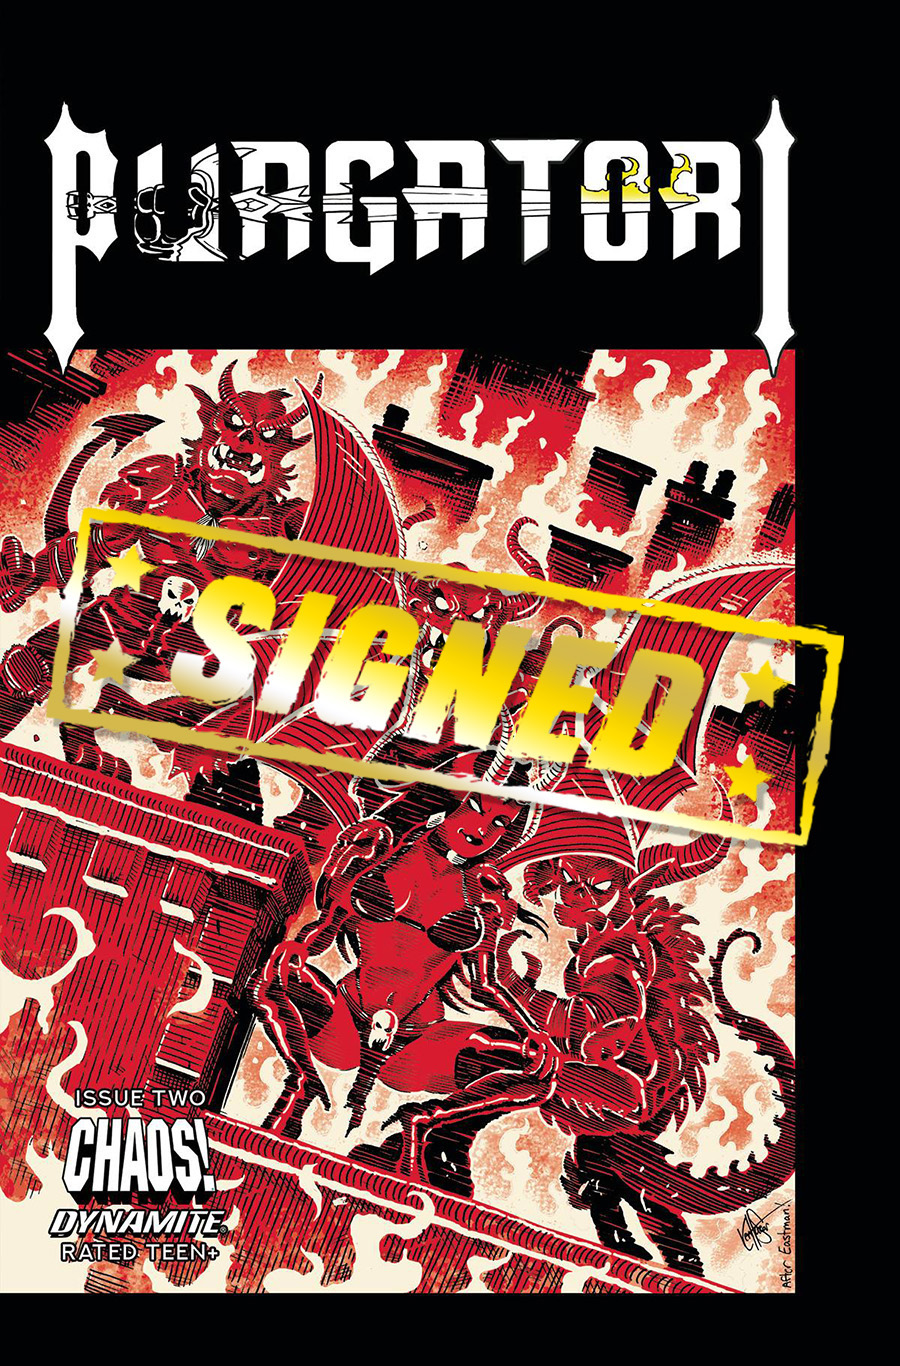 Purgatori Vol 4 #2 Cover R DF Limited Edition Ken Haeser TMNT Homage Variant Cover Signed & Remarked By Ken Haeser